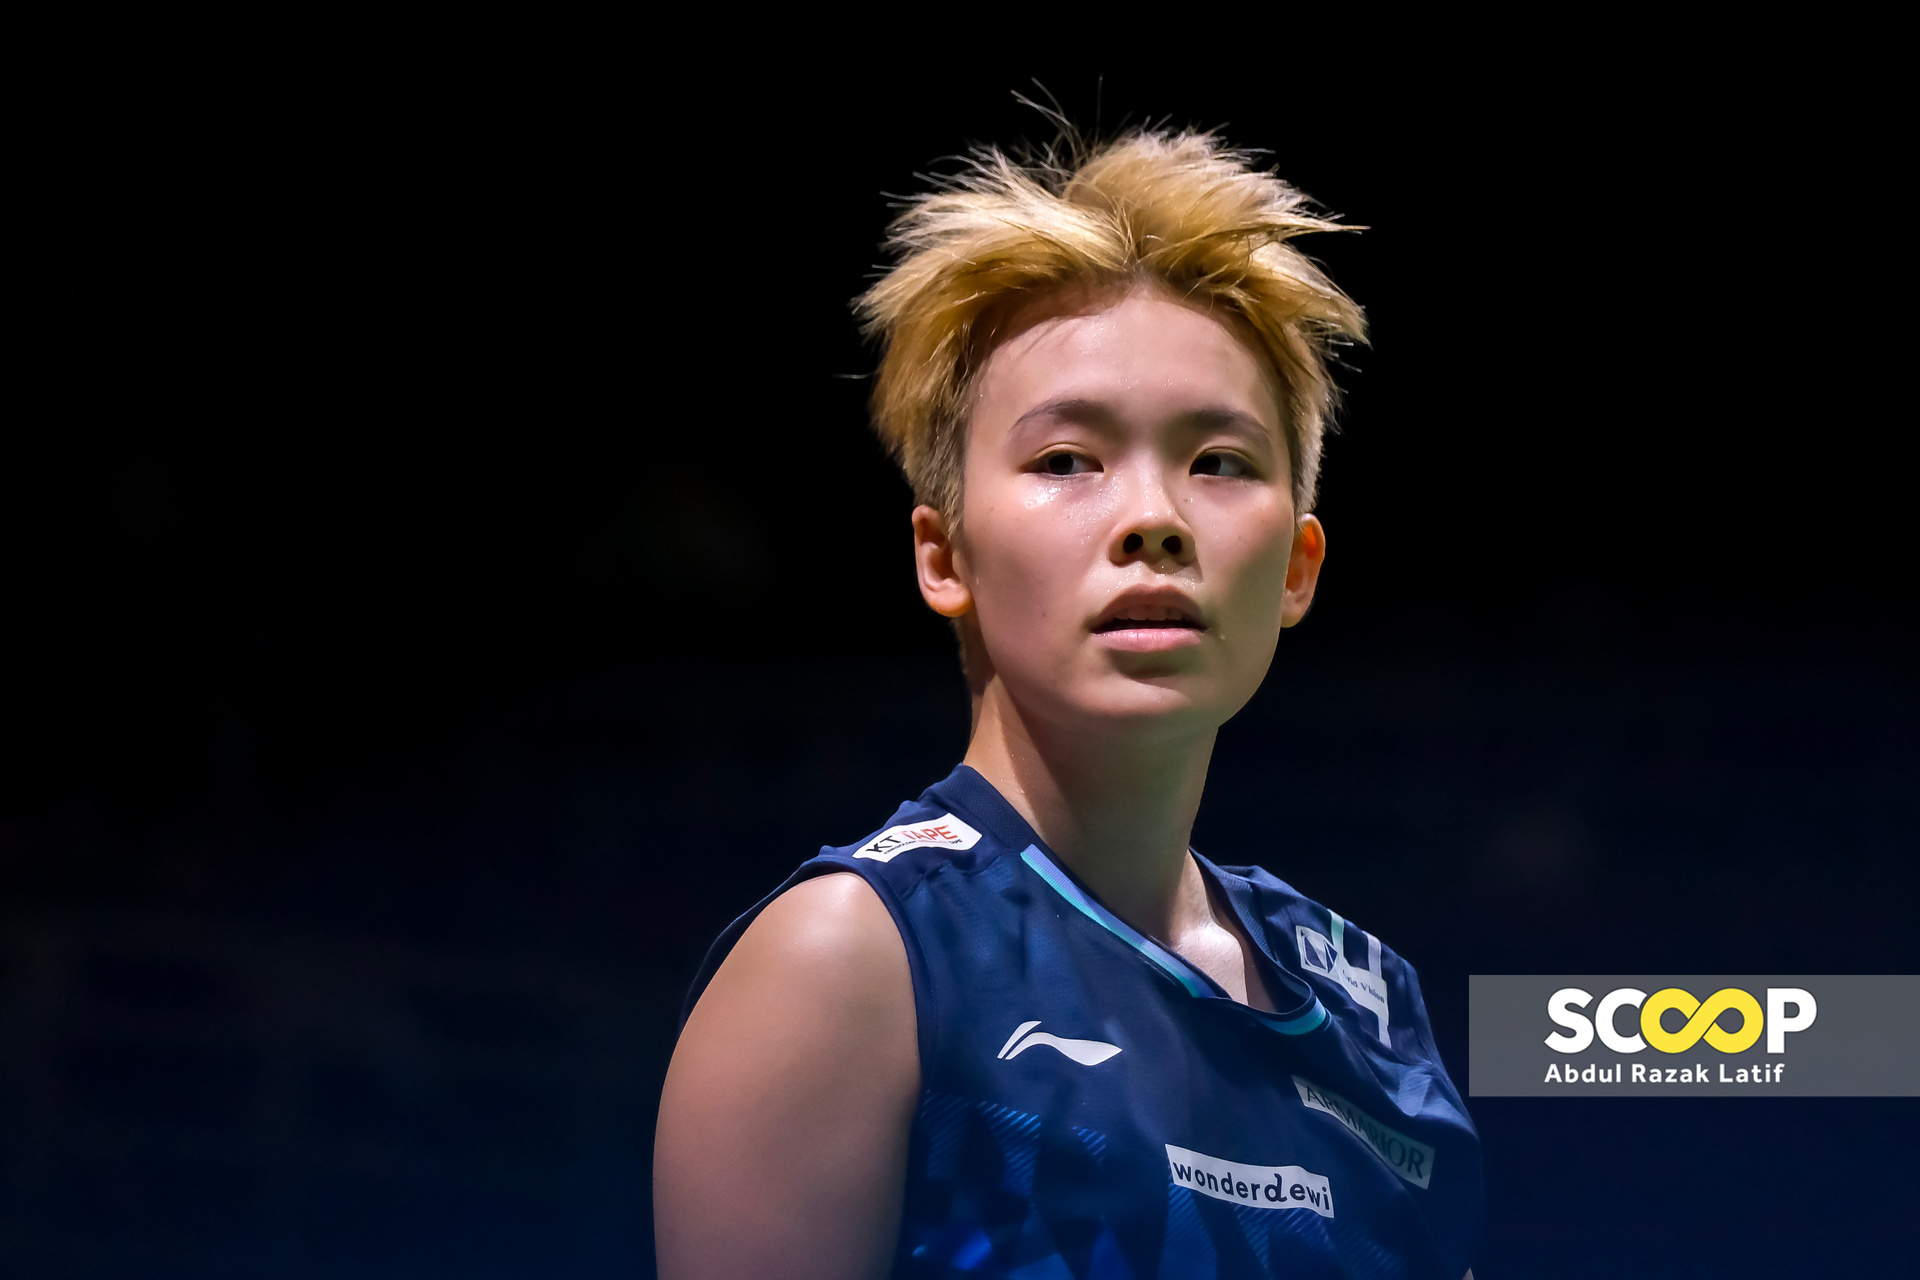 Olympic blow: Jin Wei forced to compete without trusted coach